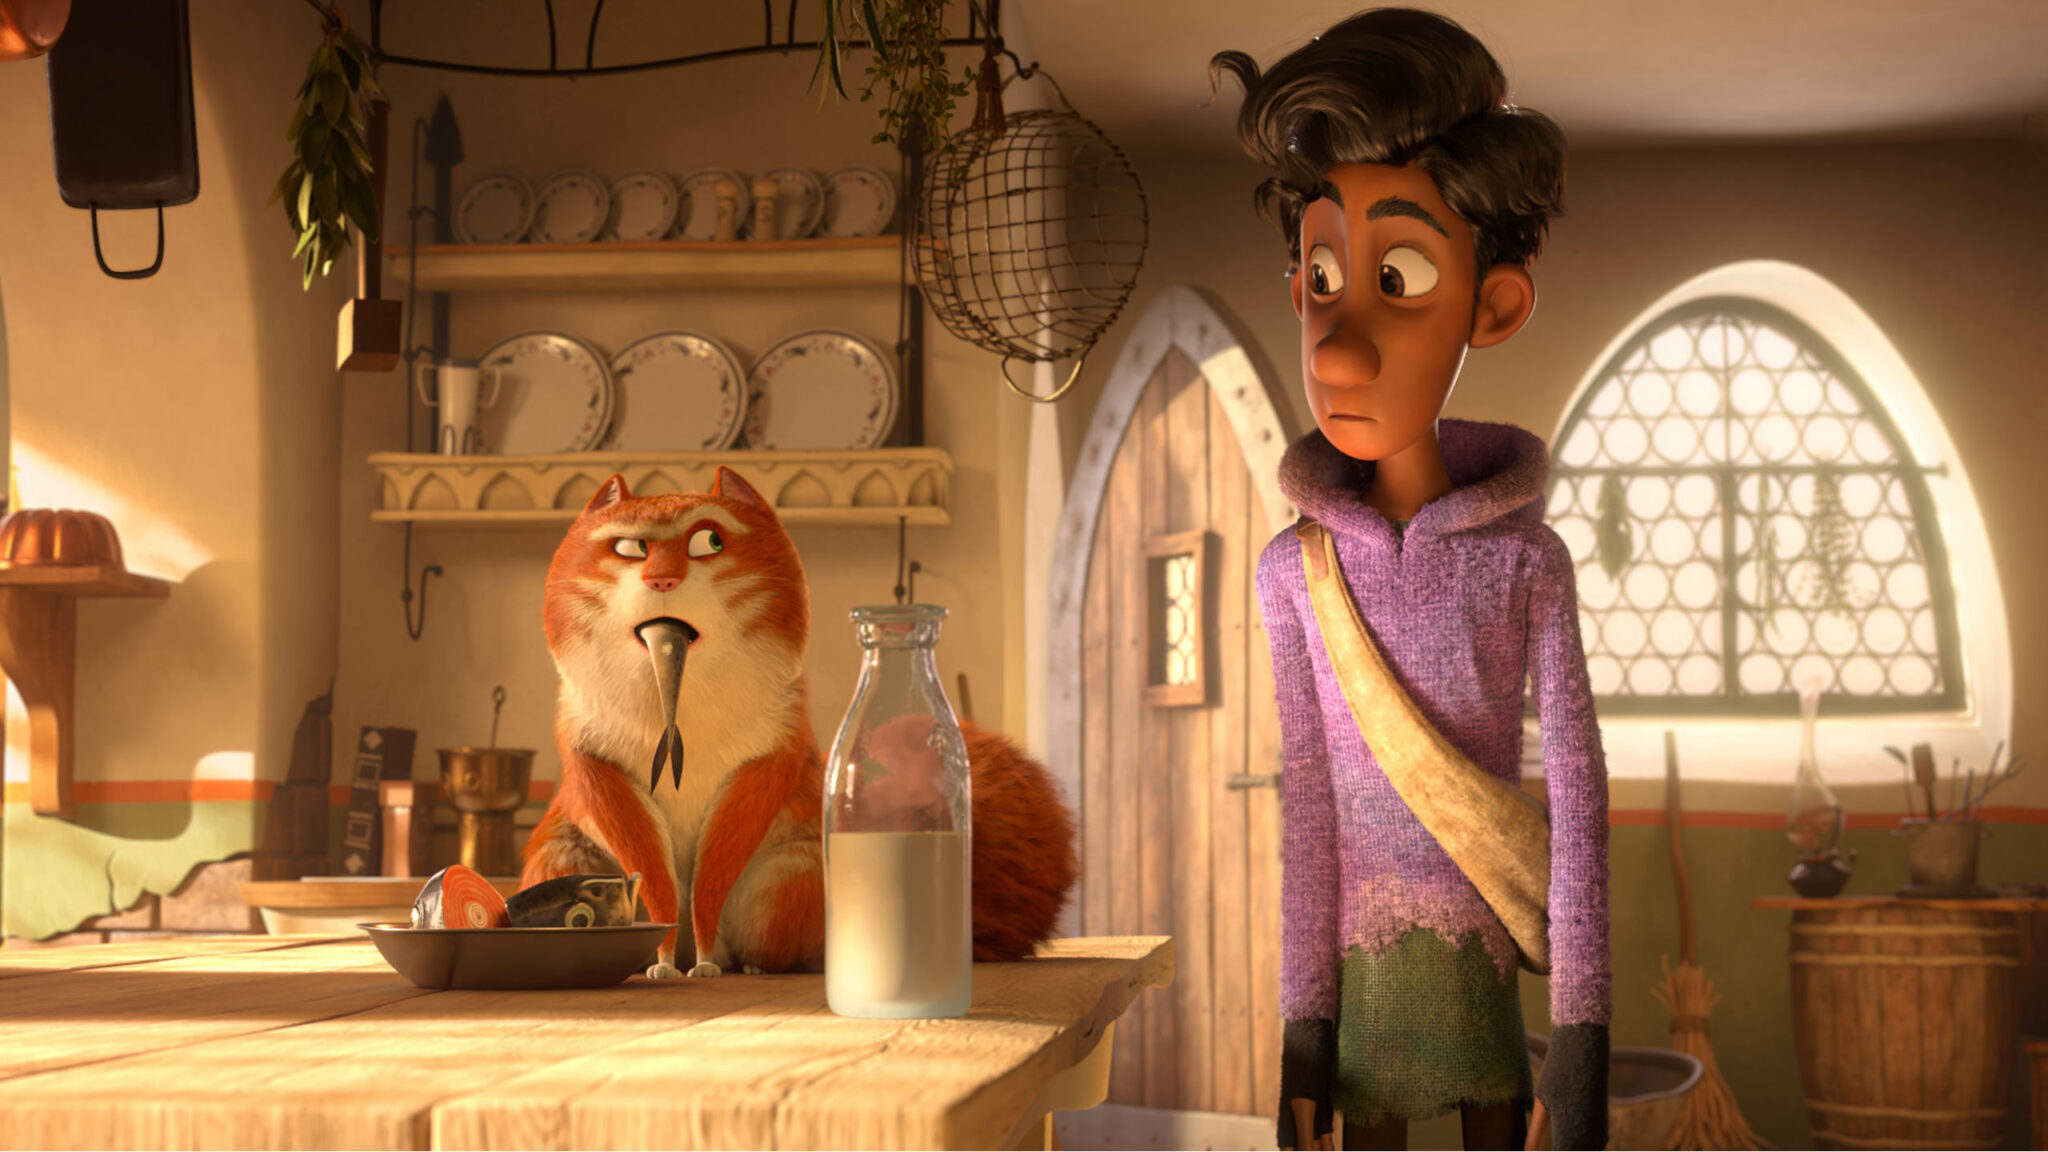 An animated still of an orange cat with a fish in his mouth looking next to a black-haired boy in a purple sweater. A carafe of milk sits on the table in front of them.